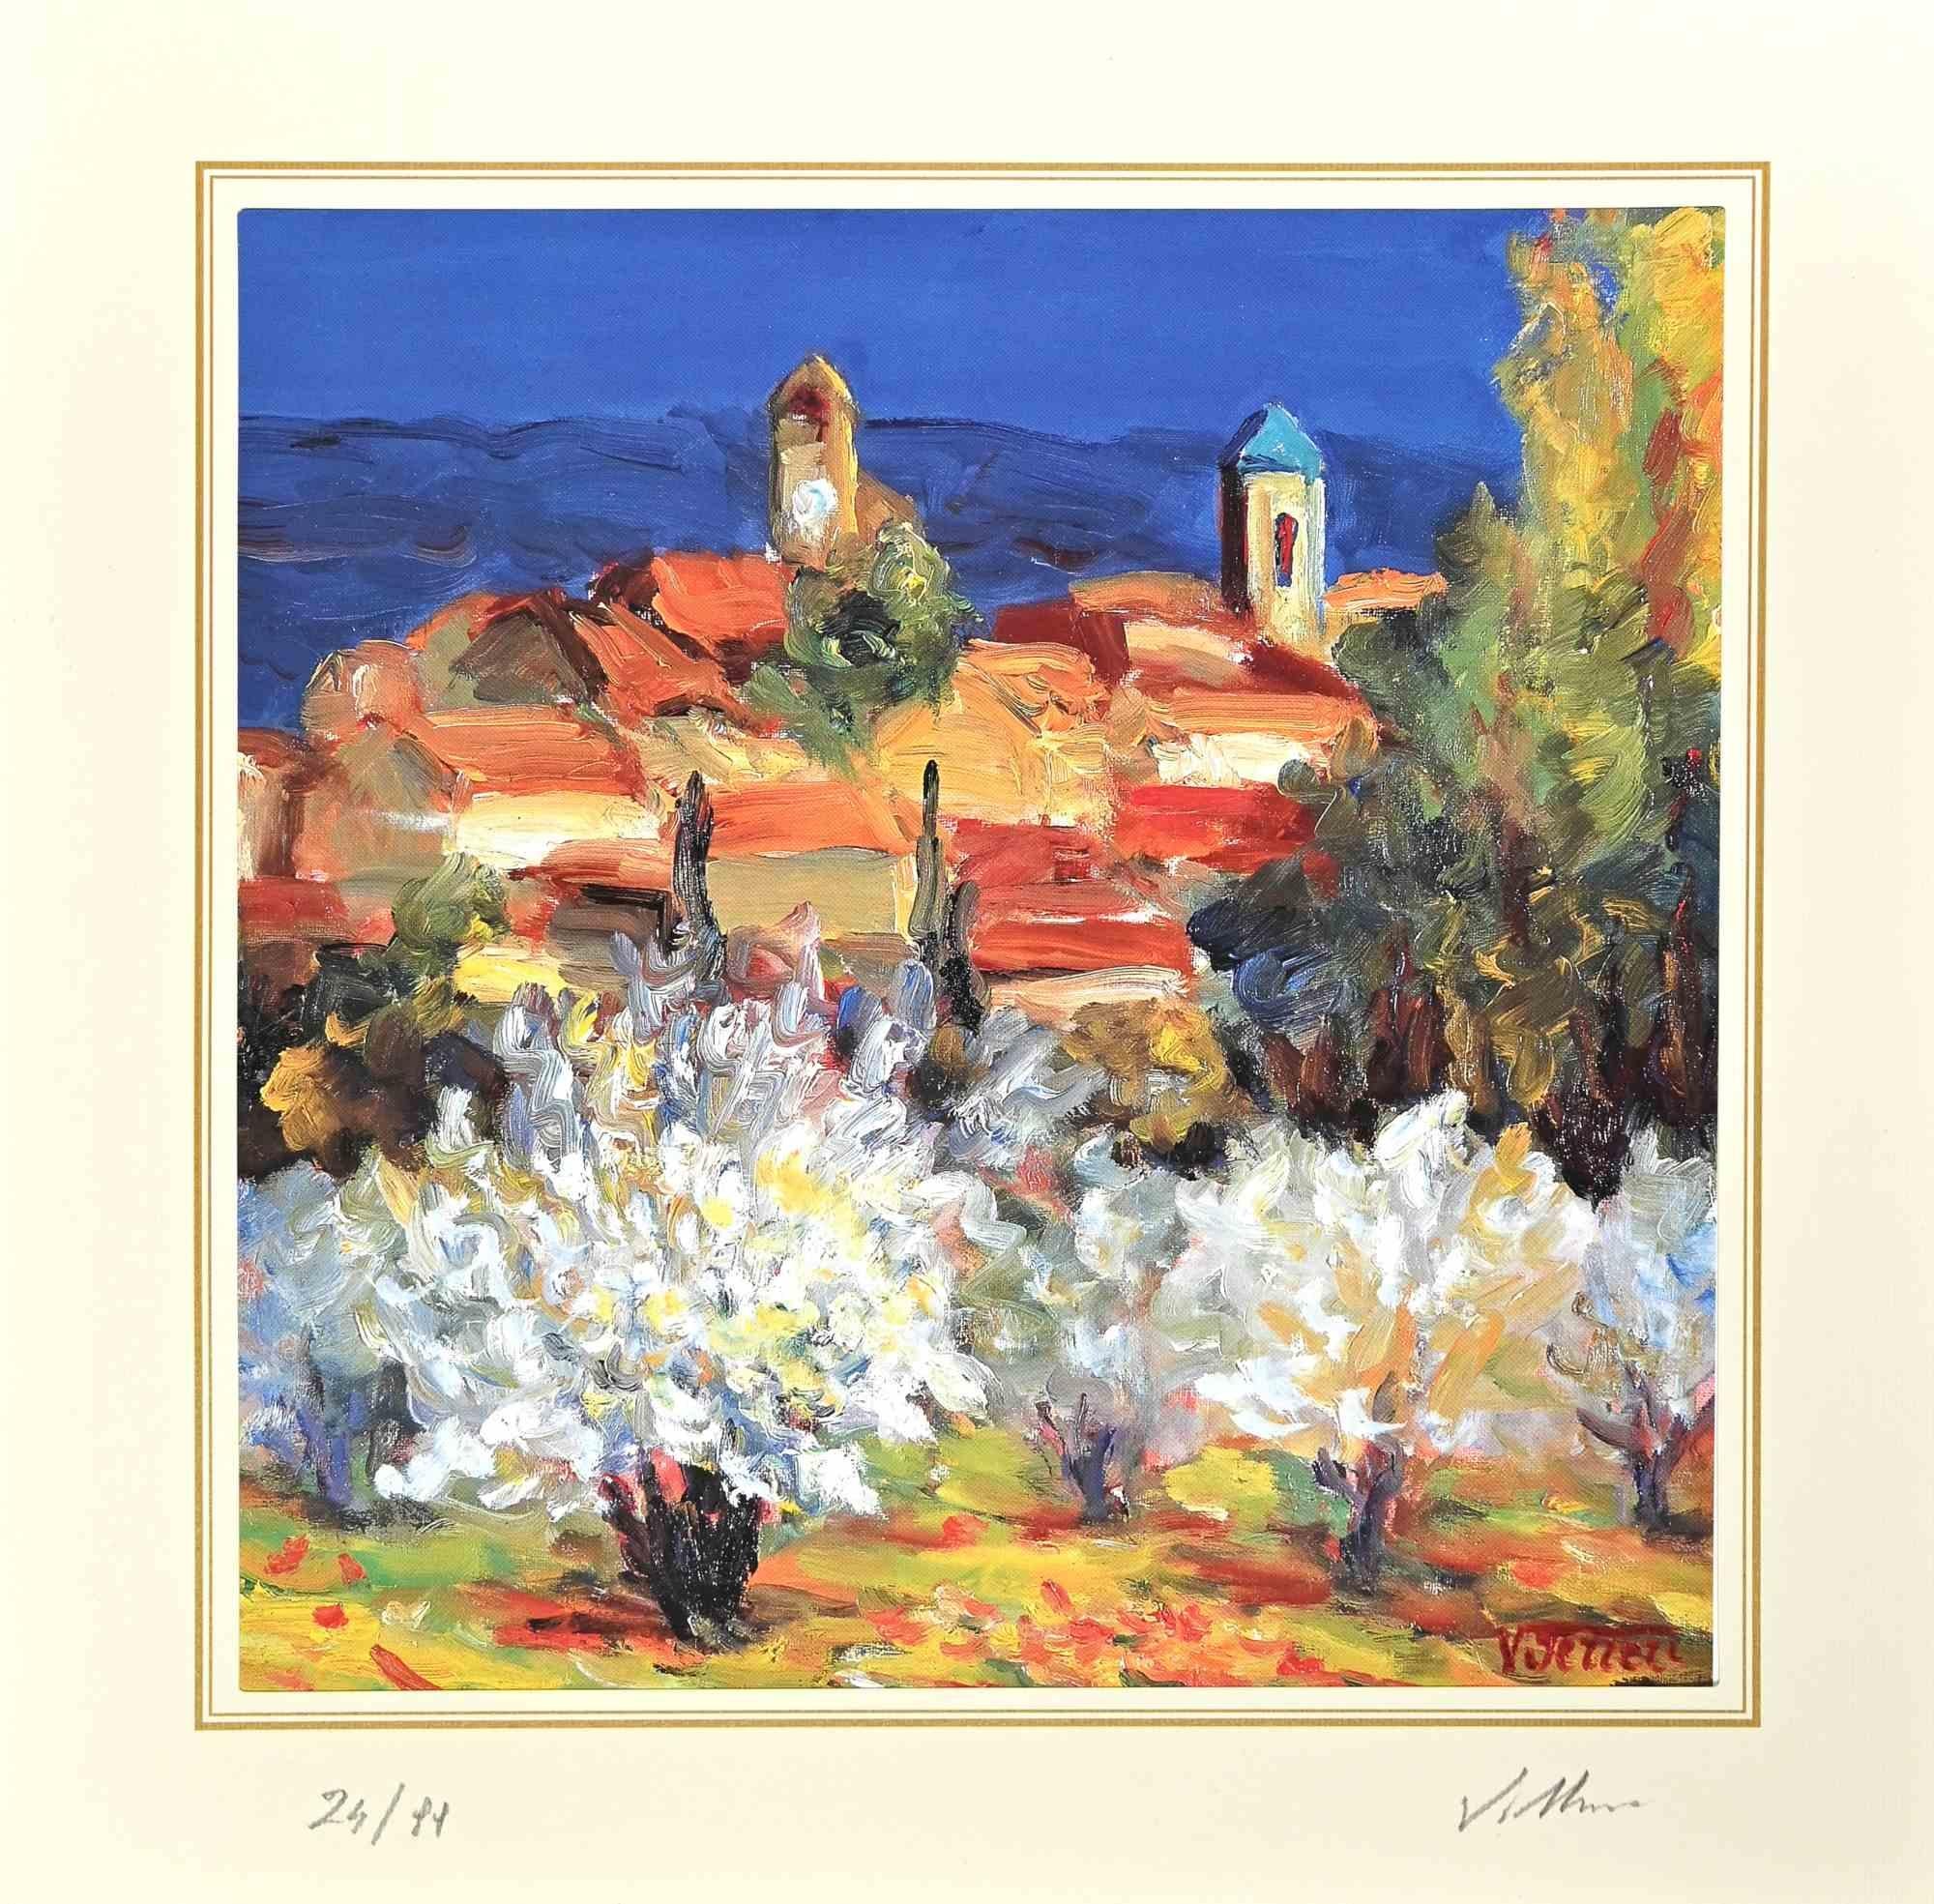 Landscape is a lithograph realized by Villani in the late 20th Century.

Numbered, Edition, 24/99.

Hand-signed.

The artwork is depicted through harmonious colors in a well-balanced composition.